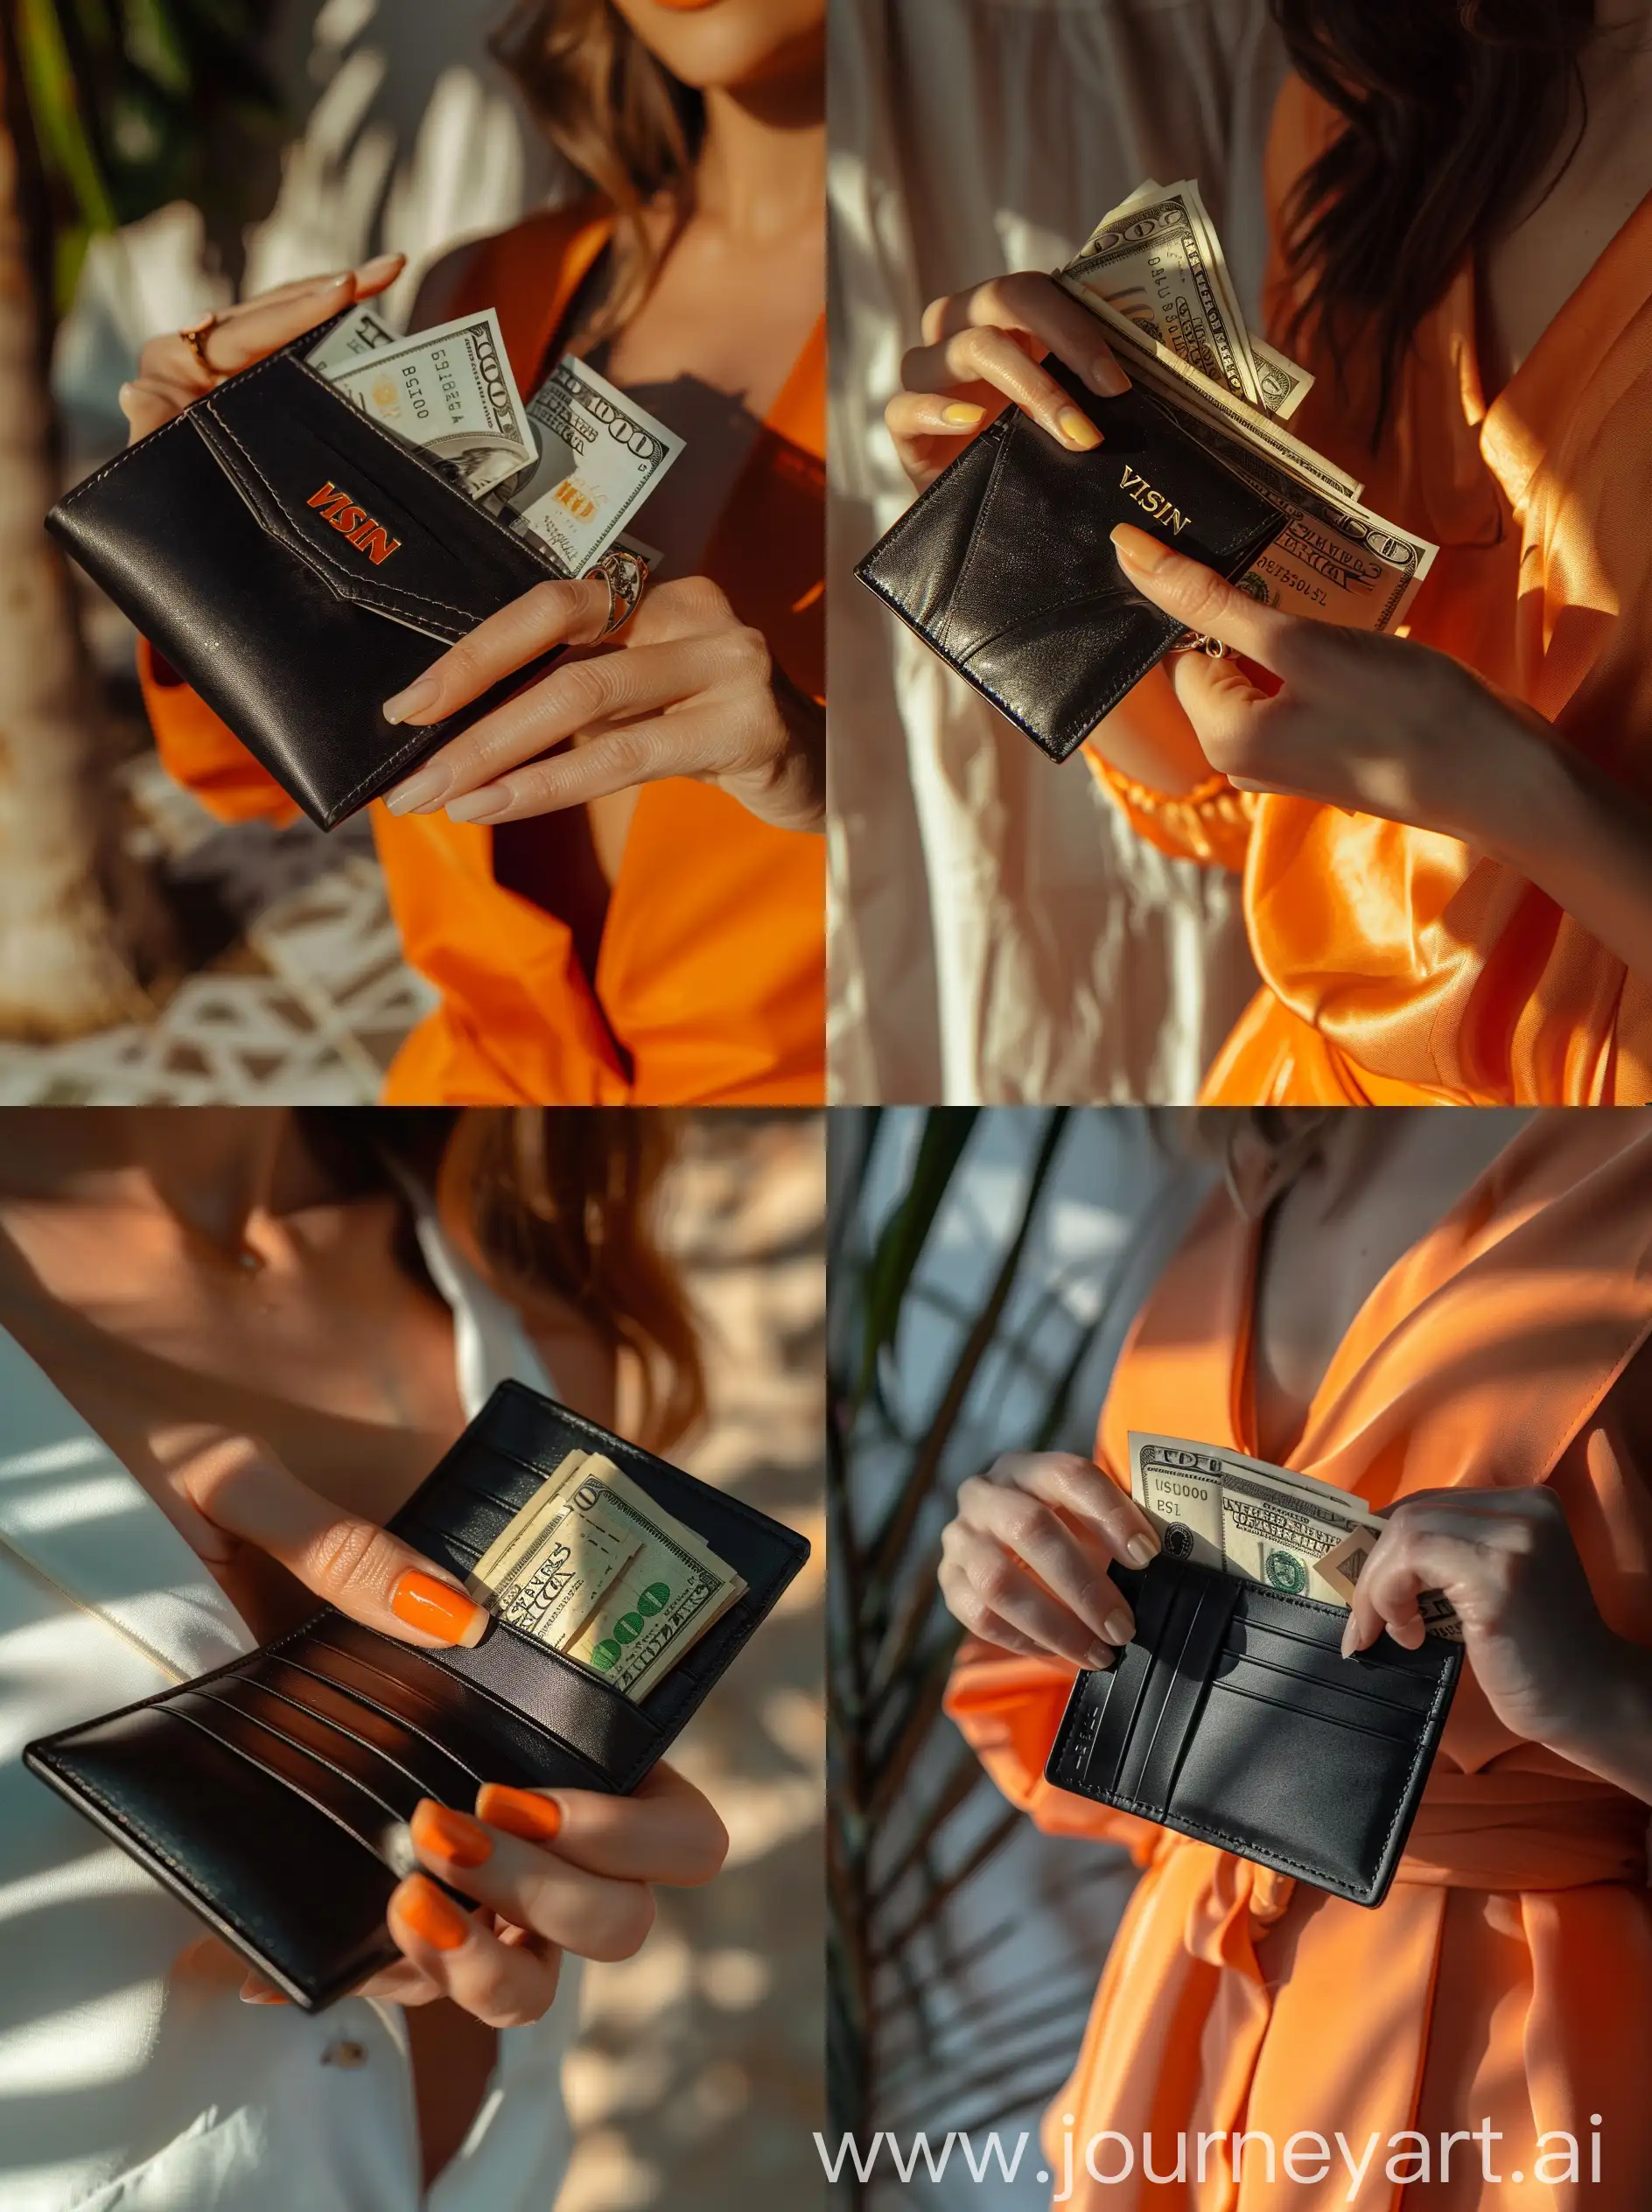 Woman-Holding-Black-Vissin-Leather-Womens-Wallet-with-100Dollar-Bills-in-Summer-Breeze-Spa-Setting